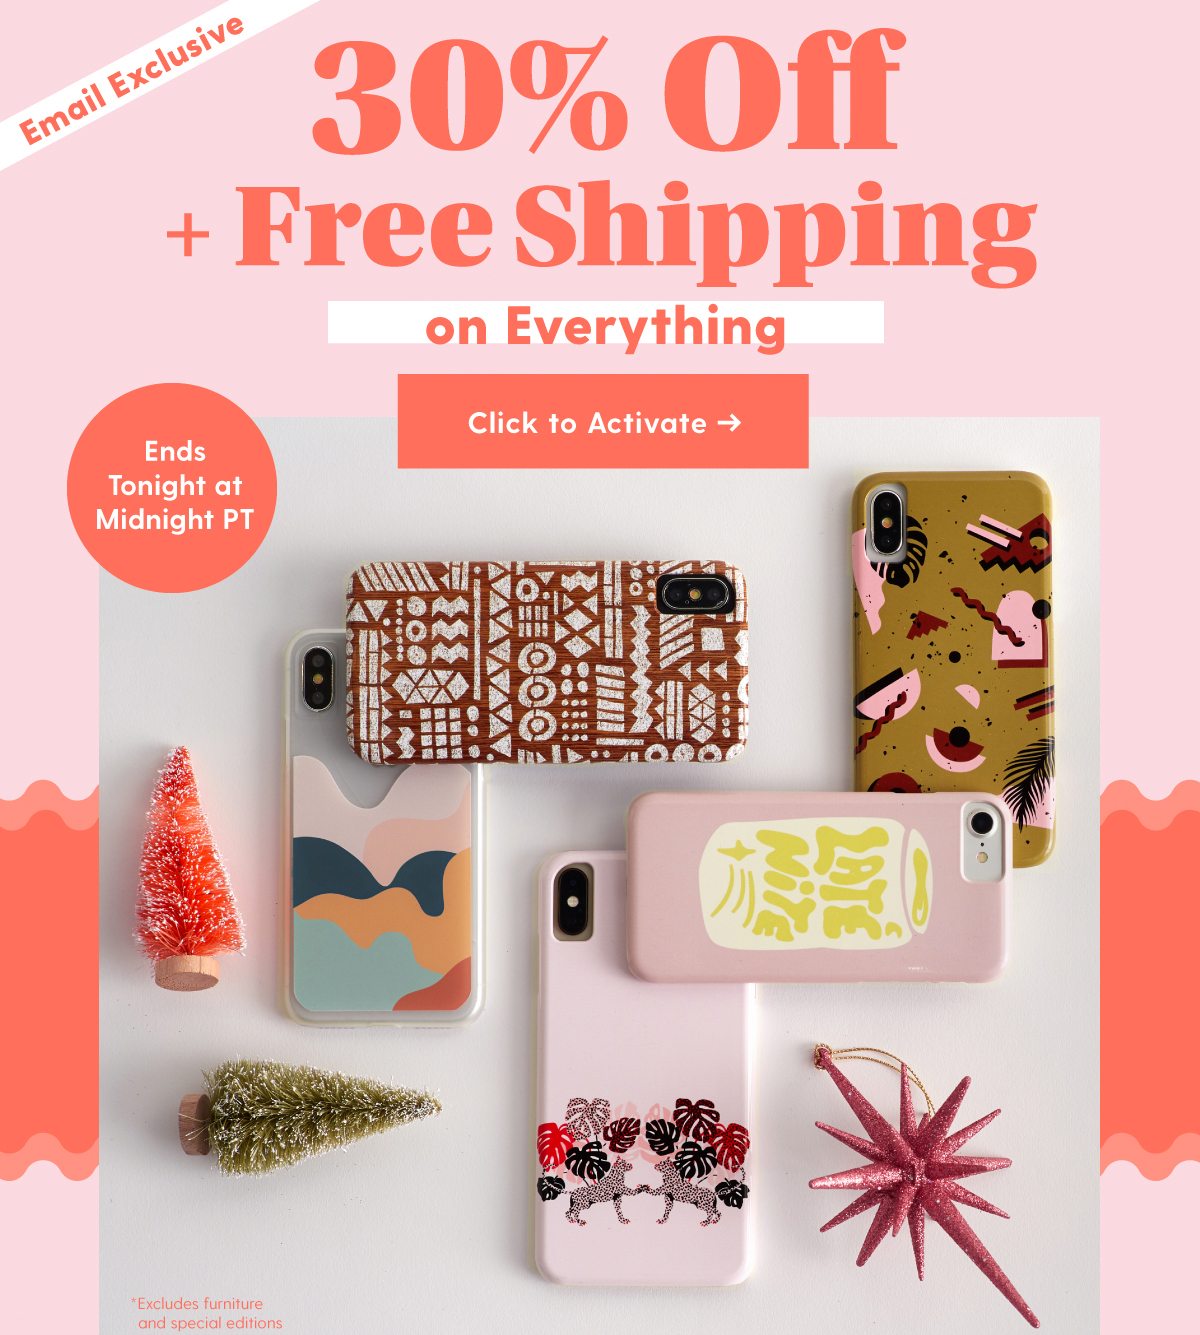 EMAIL EXCLUSIVE 30% OFF + FREE SHIPPING ON EVERYTHING TODAY CLICK TO ACTIVATE